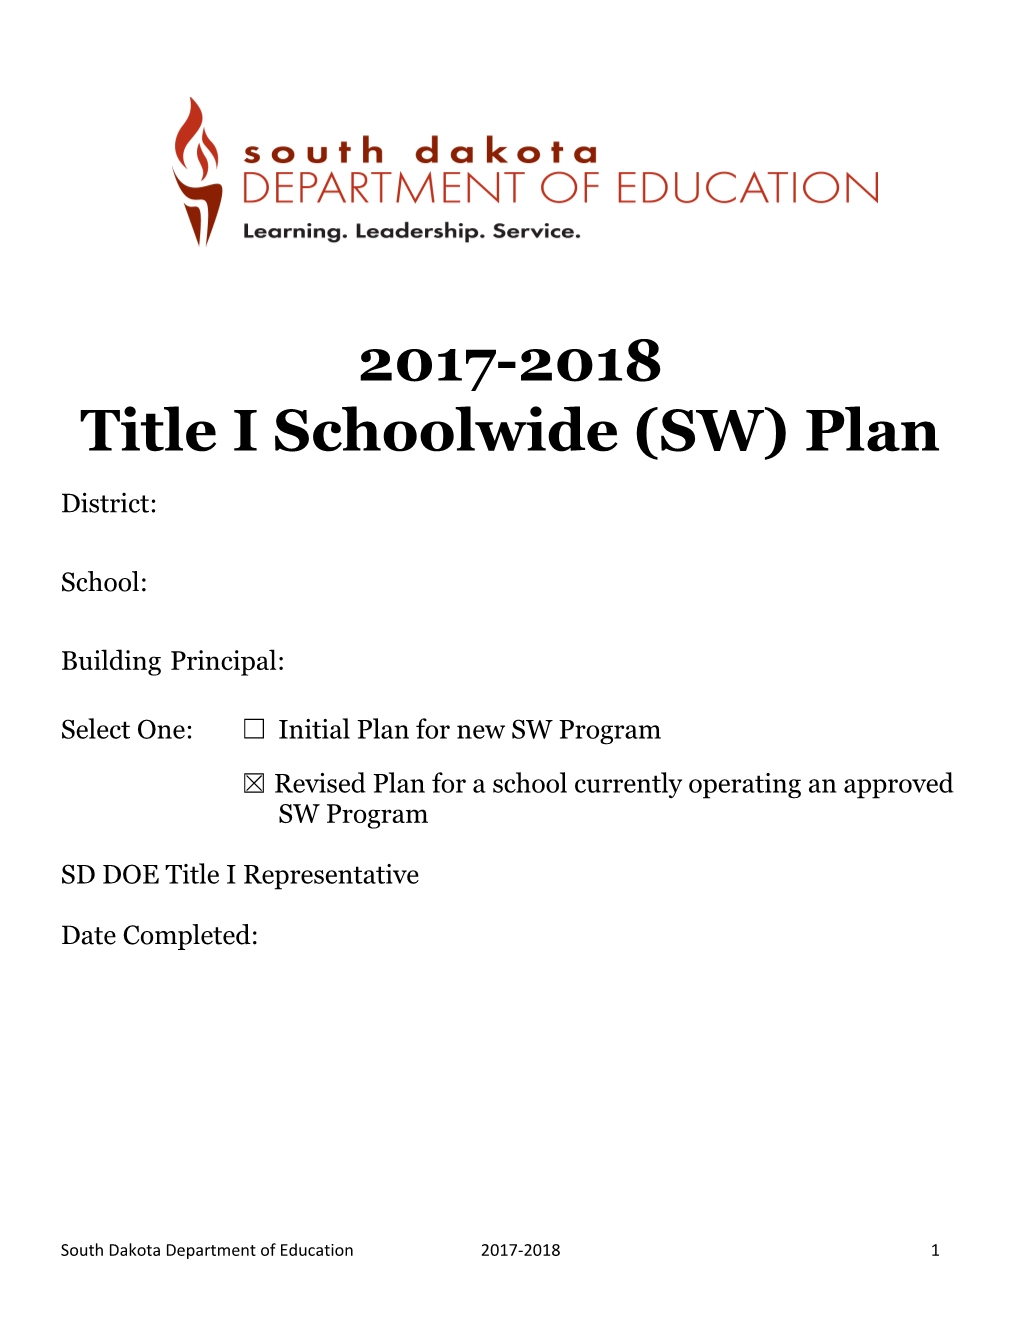 Title I Schoolwide (SW) Plan